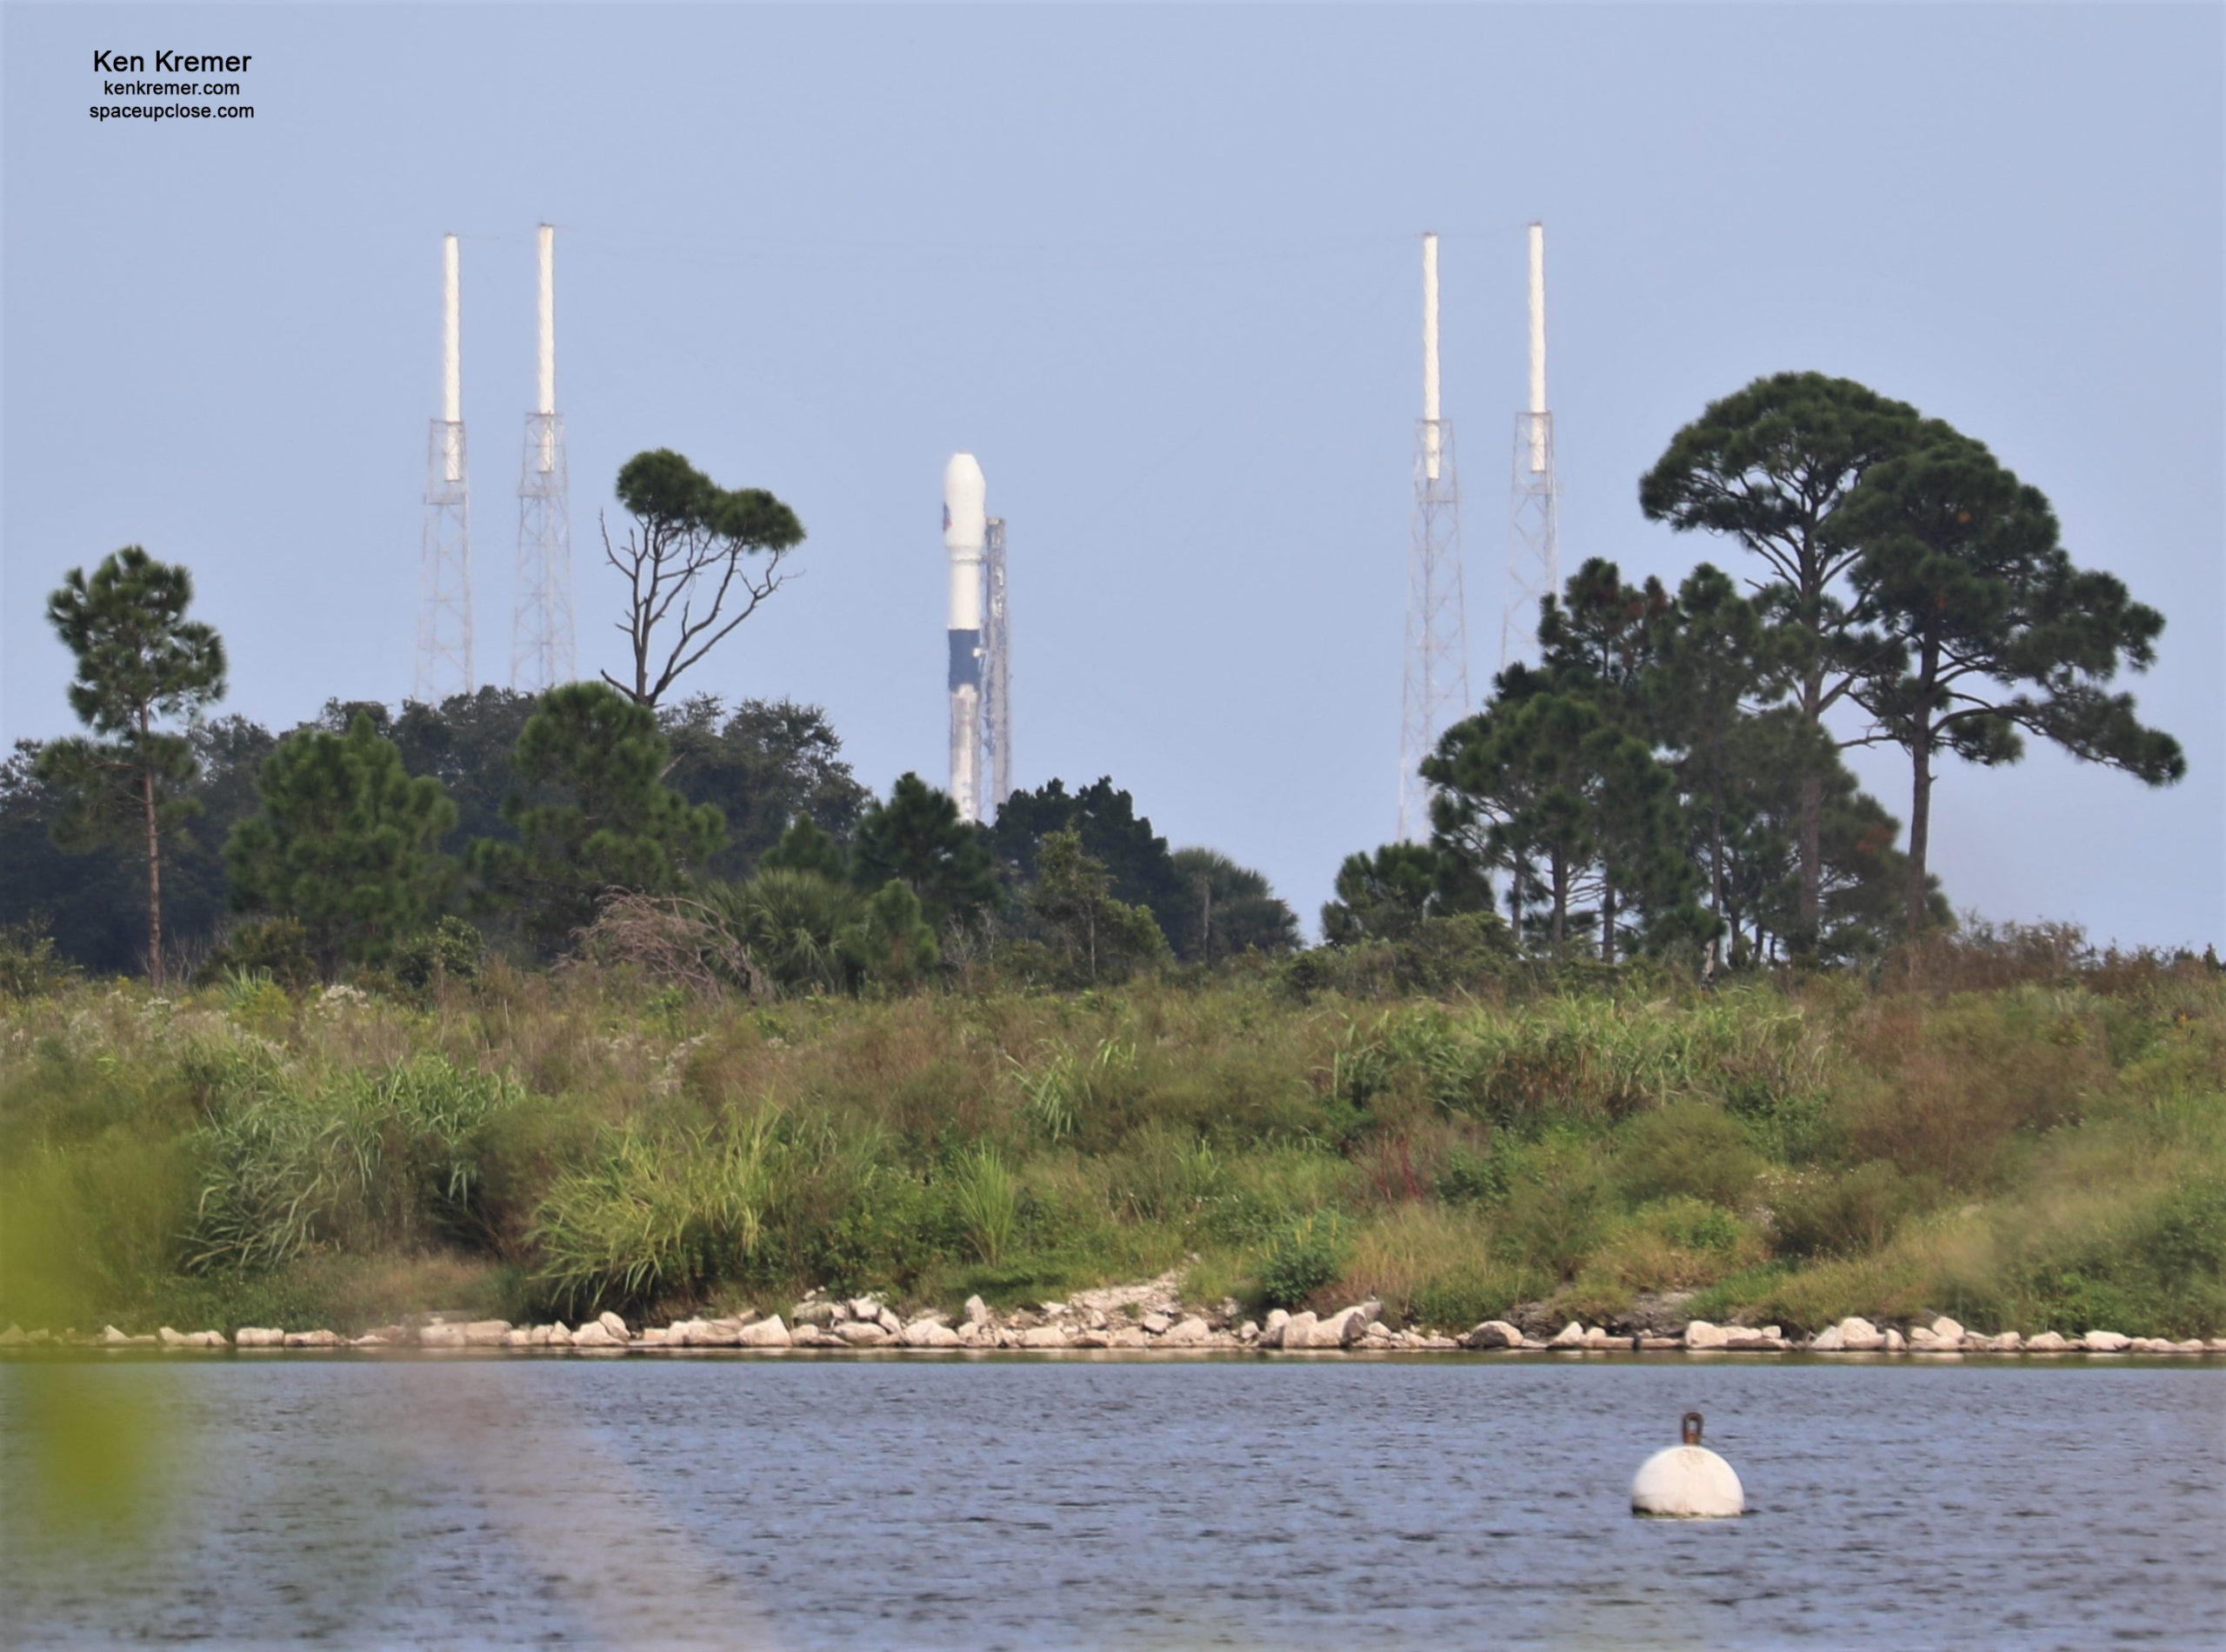 SpaceX Targets Unprecedented Falcon 9 Launch Double Header Sunday of Starlink and Saocom Sats after ULA Delta IV Heavy Hot Fire Pad Abort: Photos/Watch Live